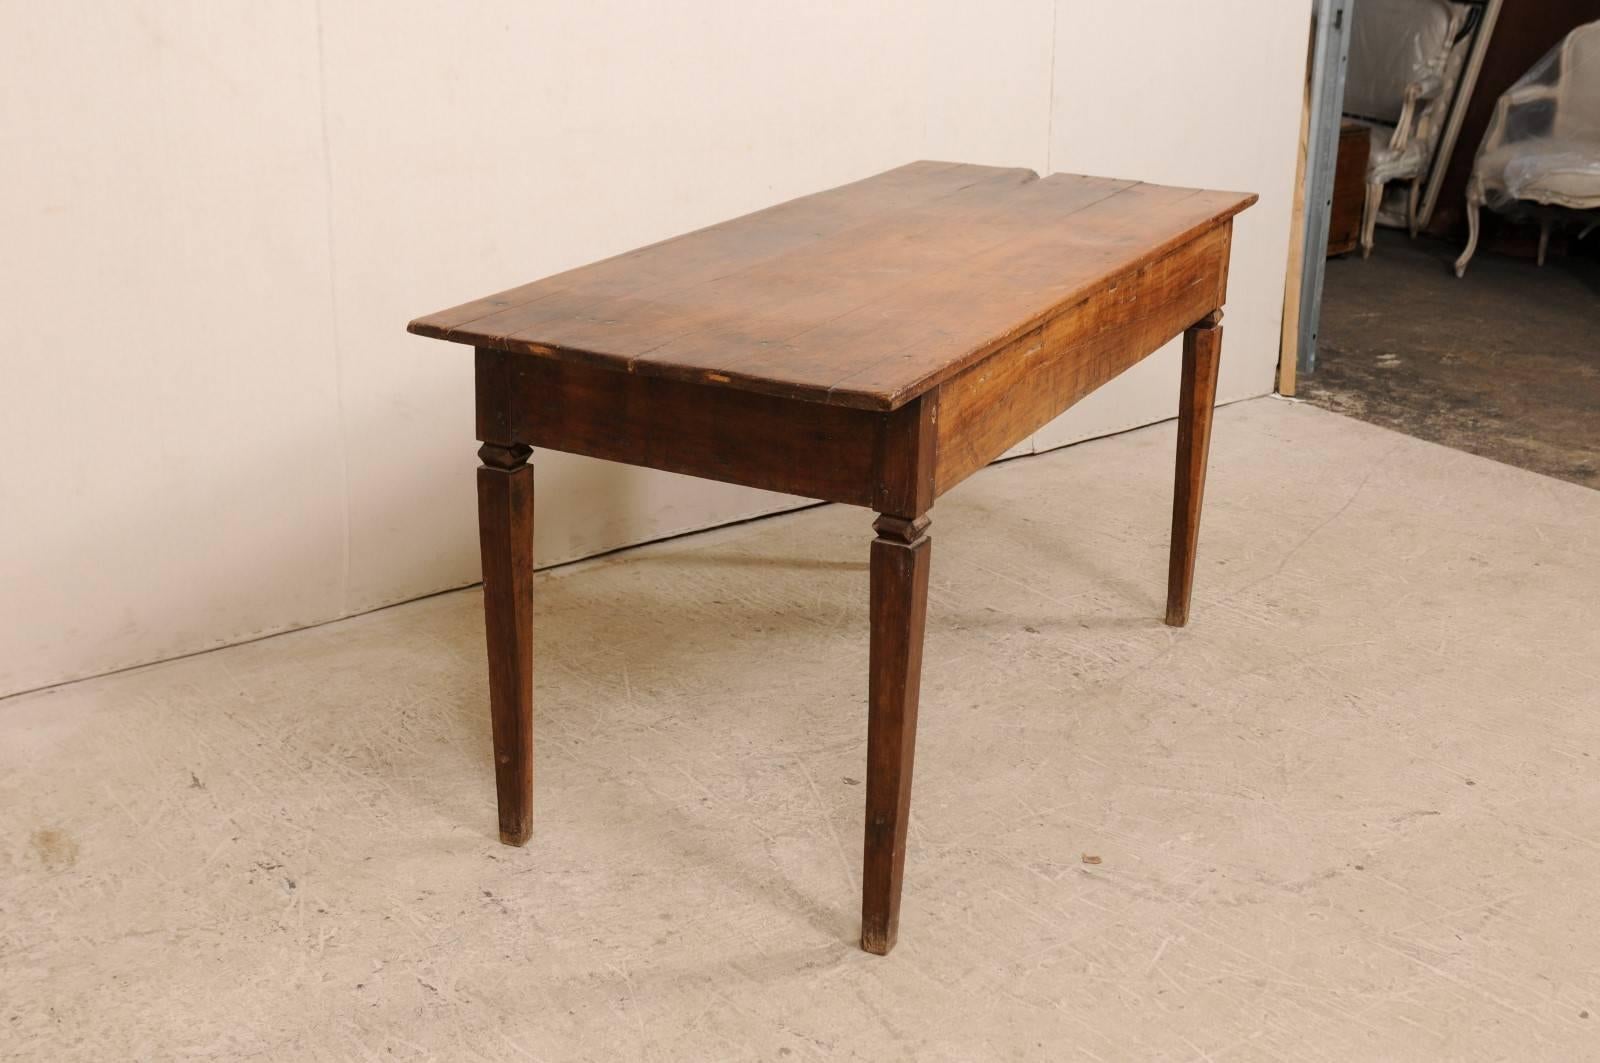 Brazilian 19th Century Carved Peroba Wood Table with Elegant Tapered Legs 1